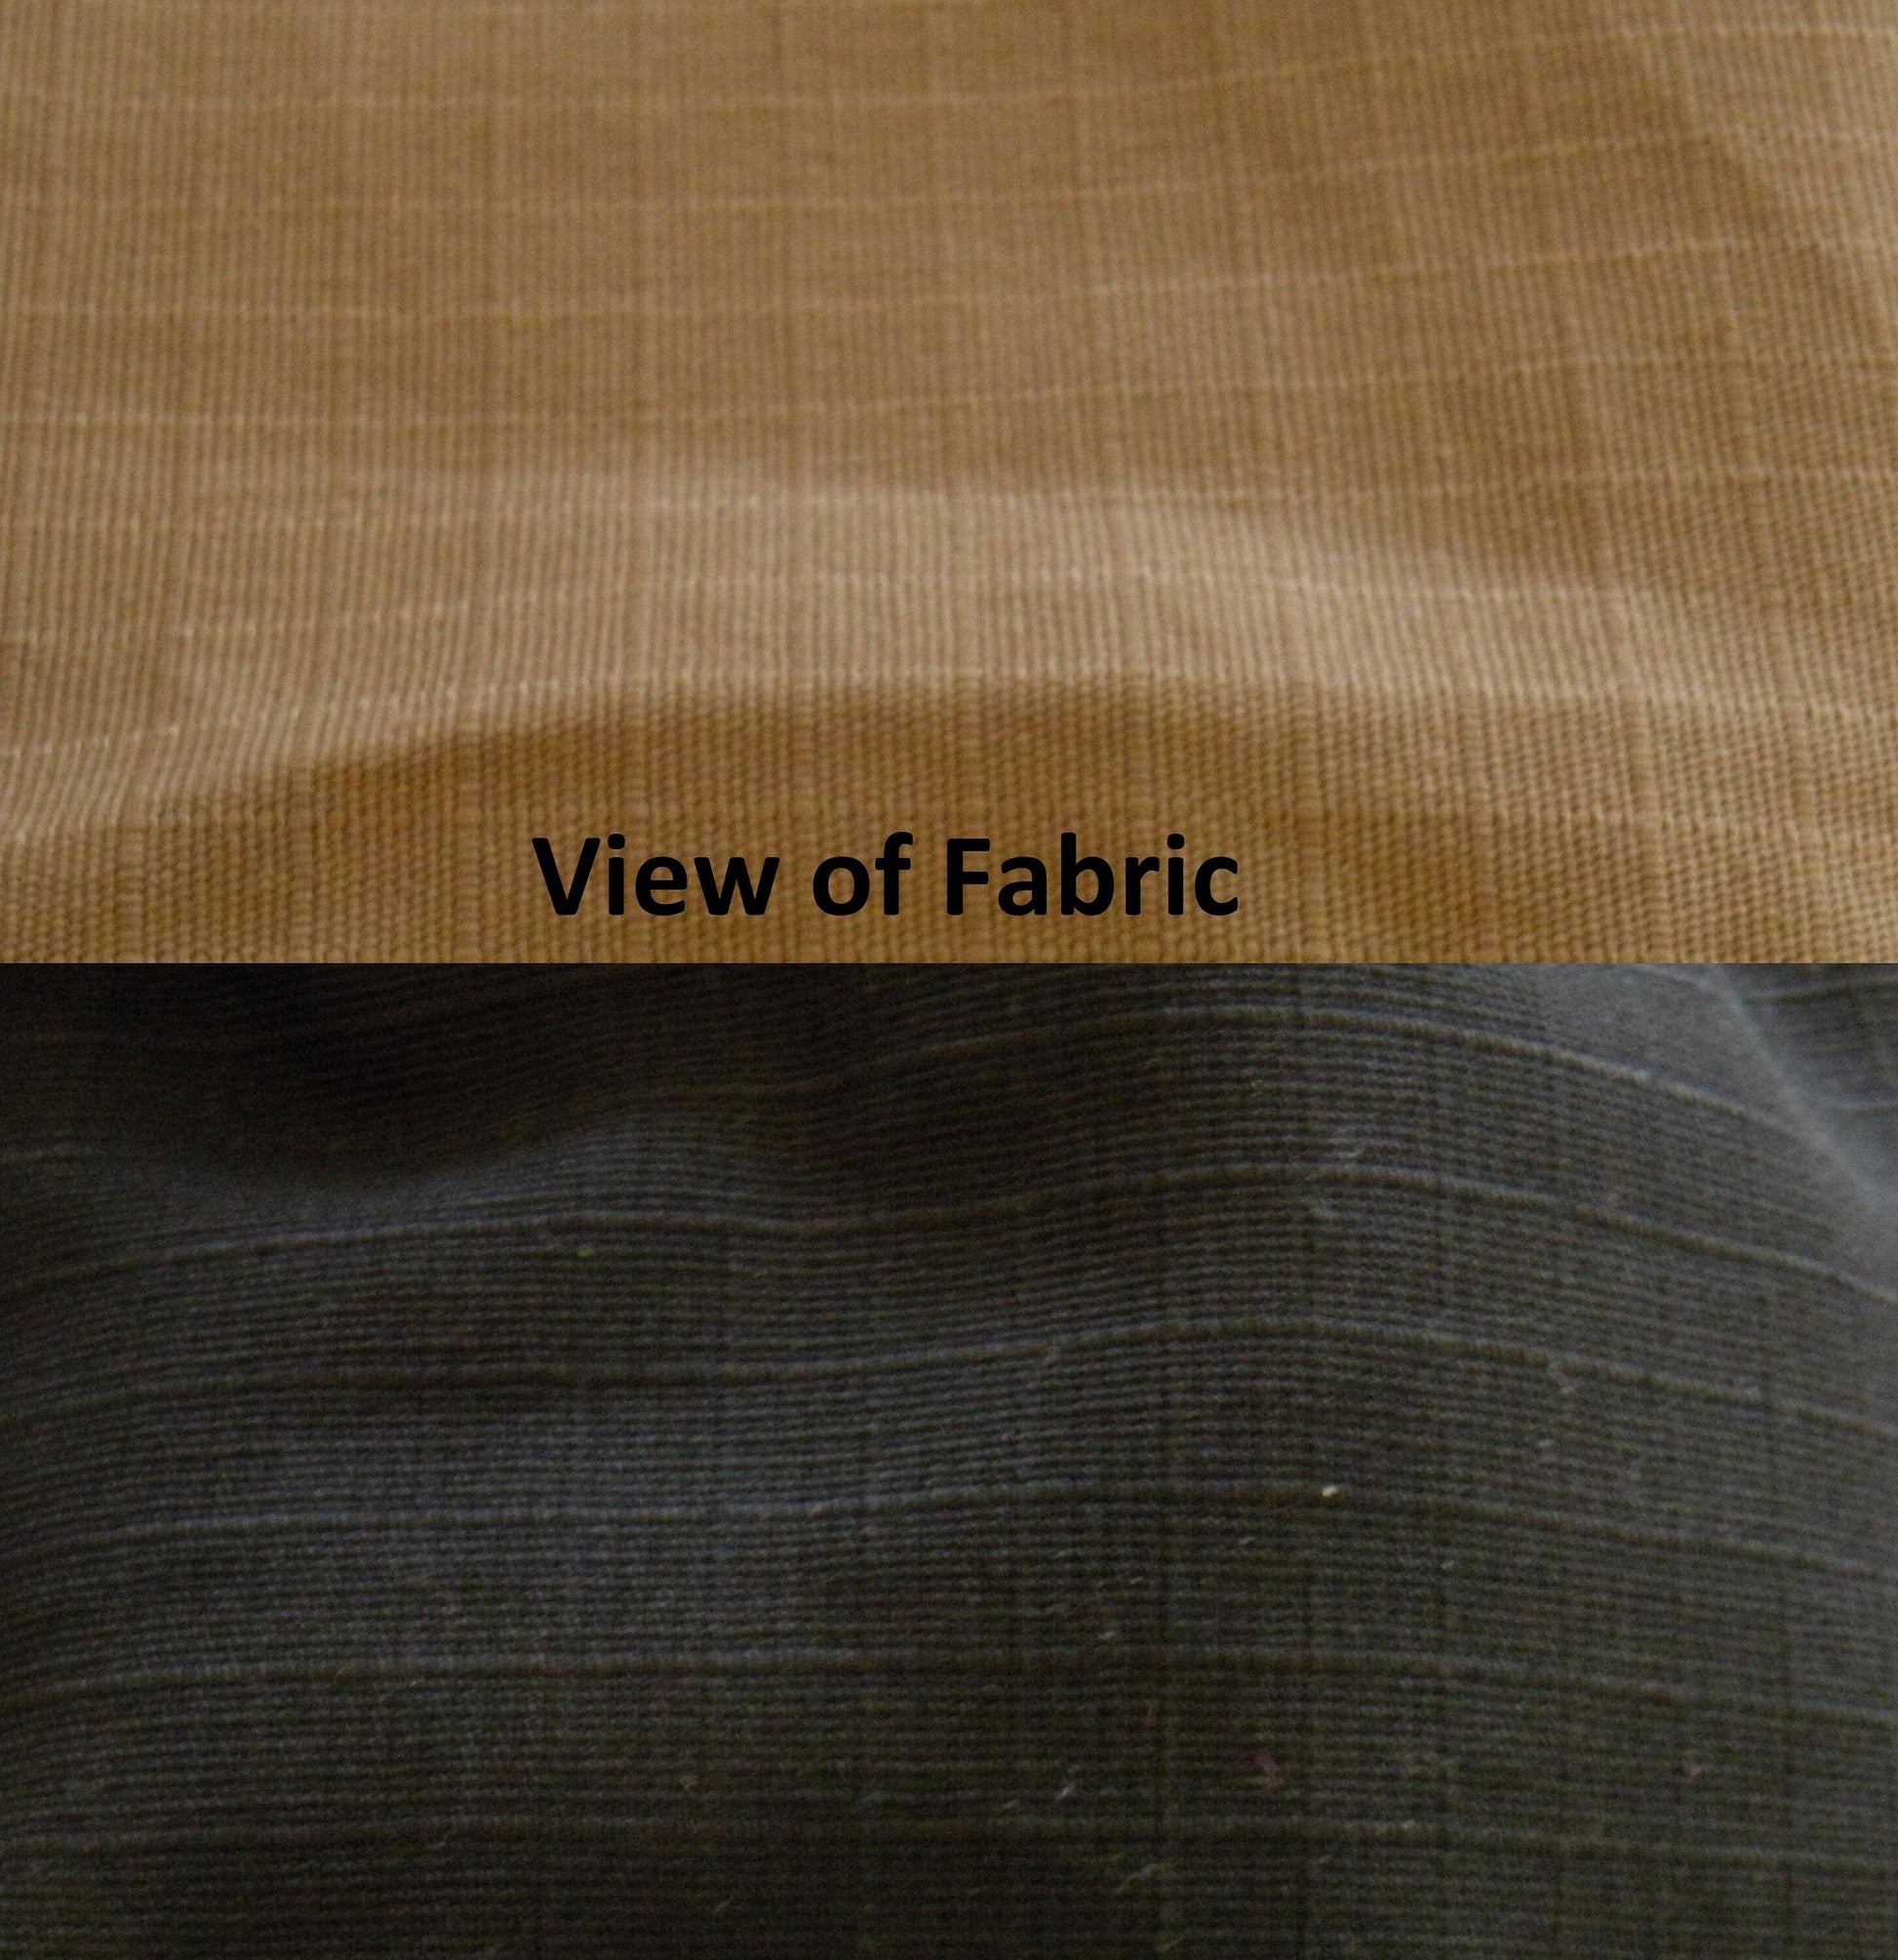 tan and black fabric 100% cotton ripstop